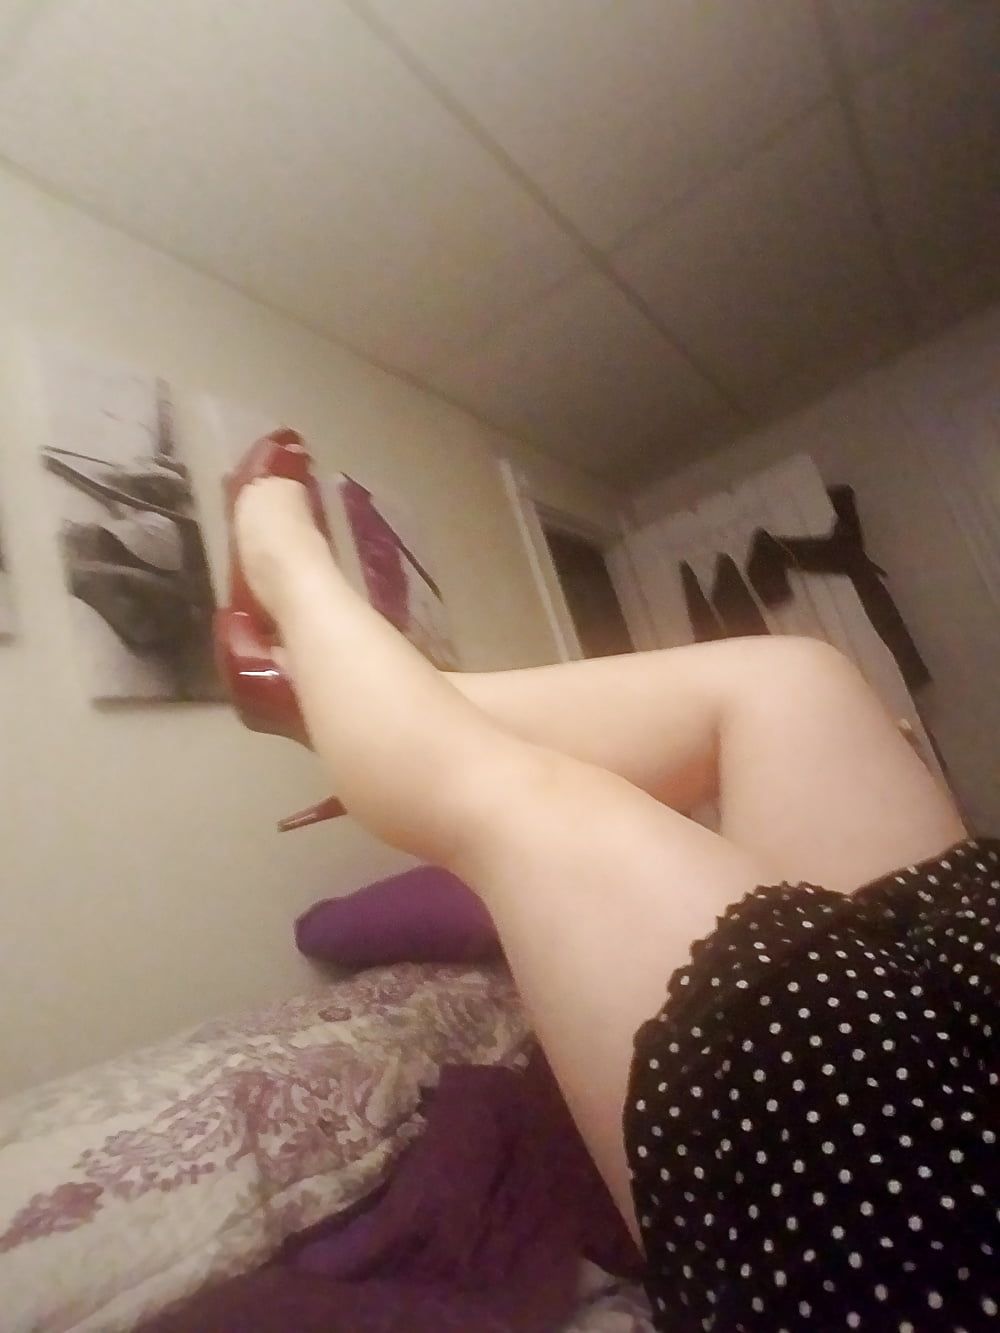 Feet, Legs, Heels & Boots of the Sweet Sexy Housewife  #13